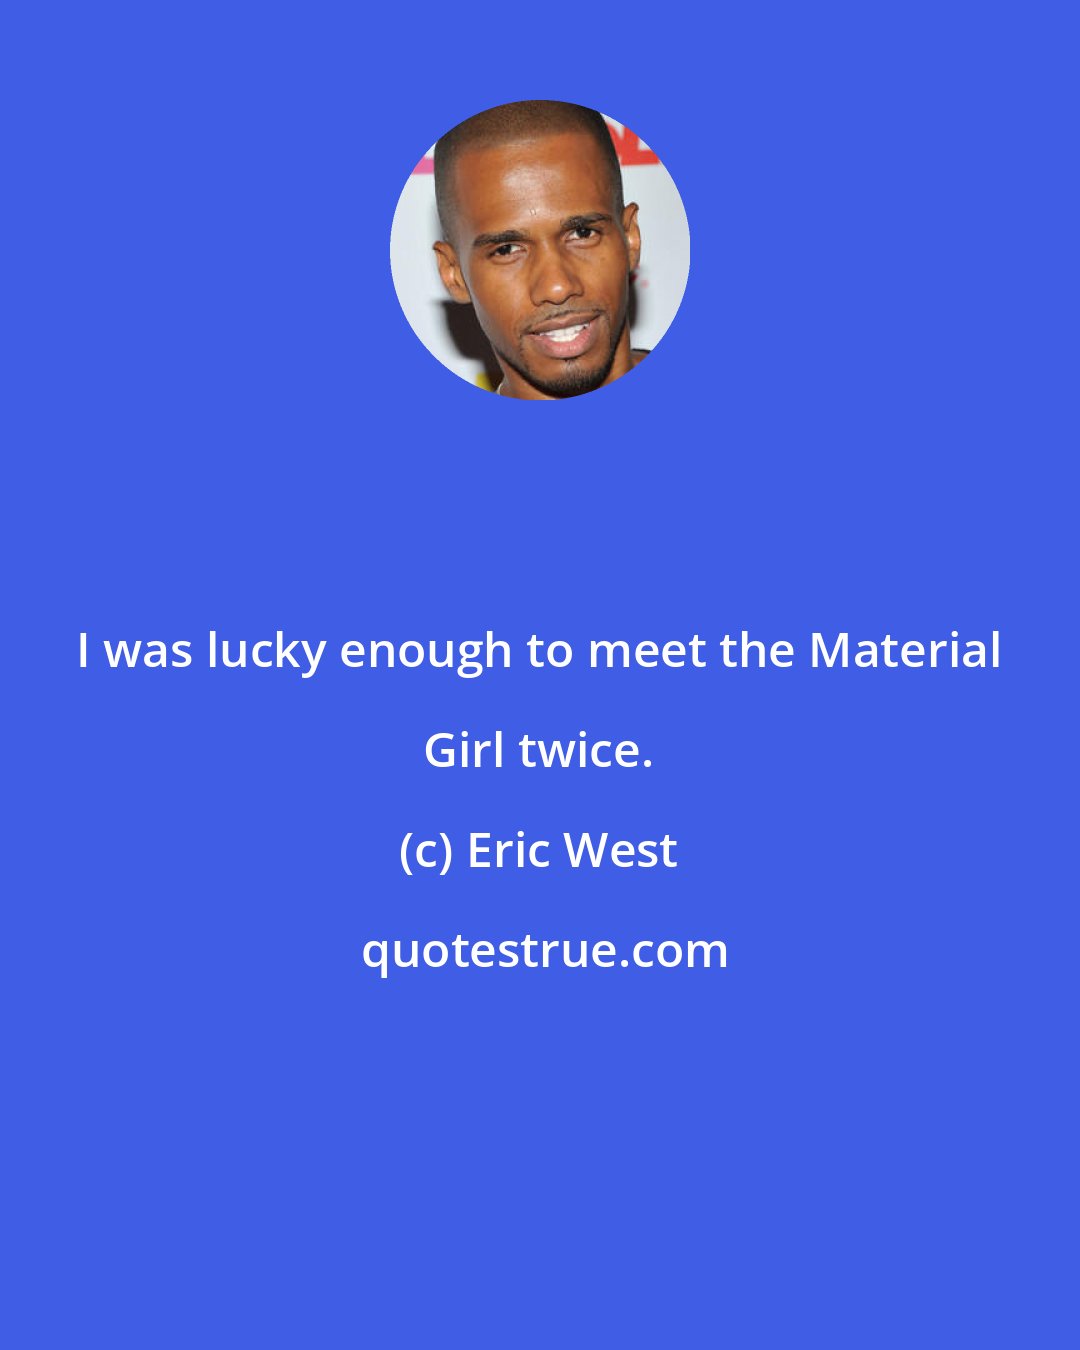 Eric West: I was lucky enough to meet the Material Girl twice.